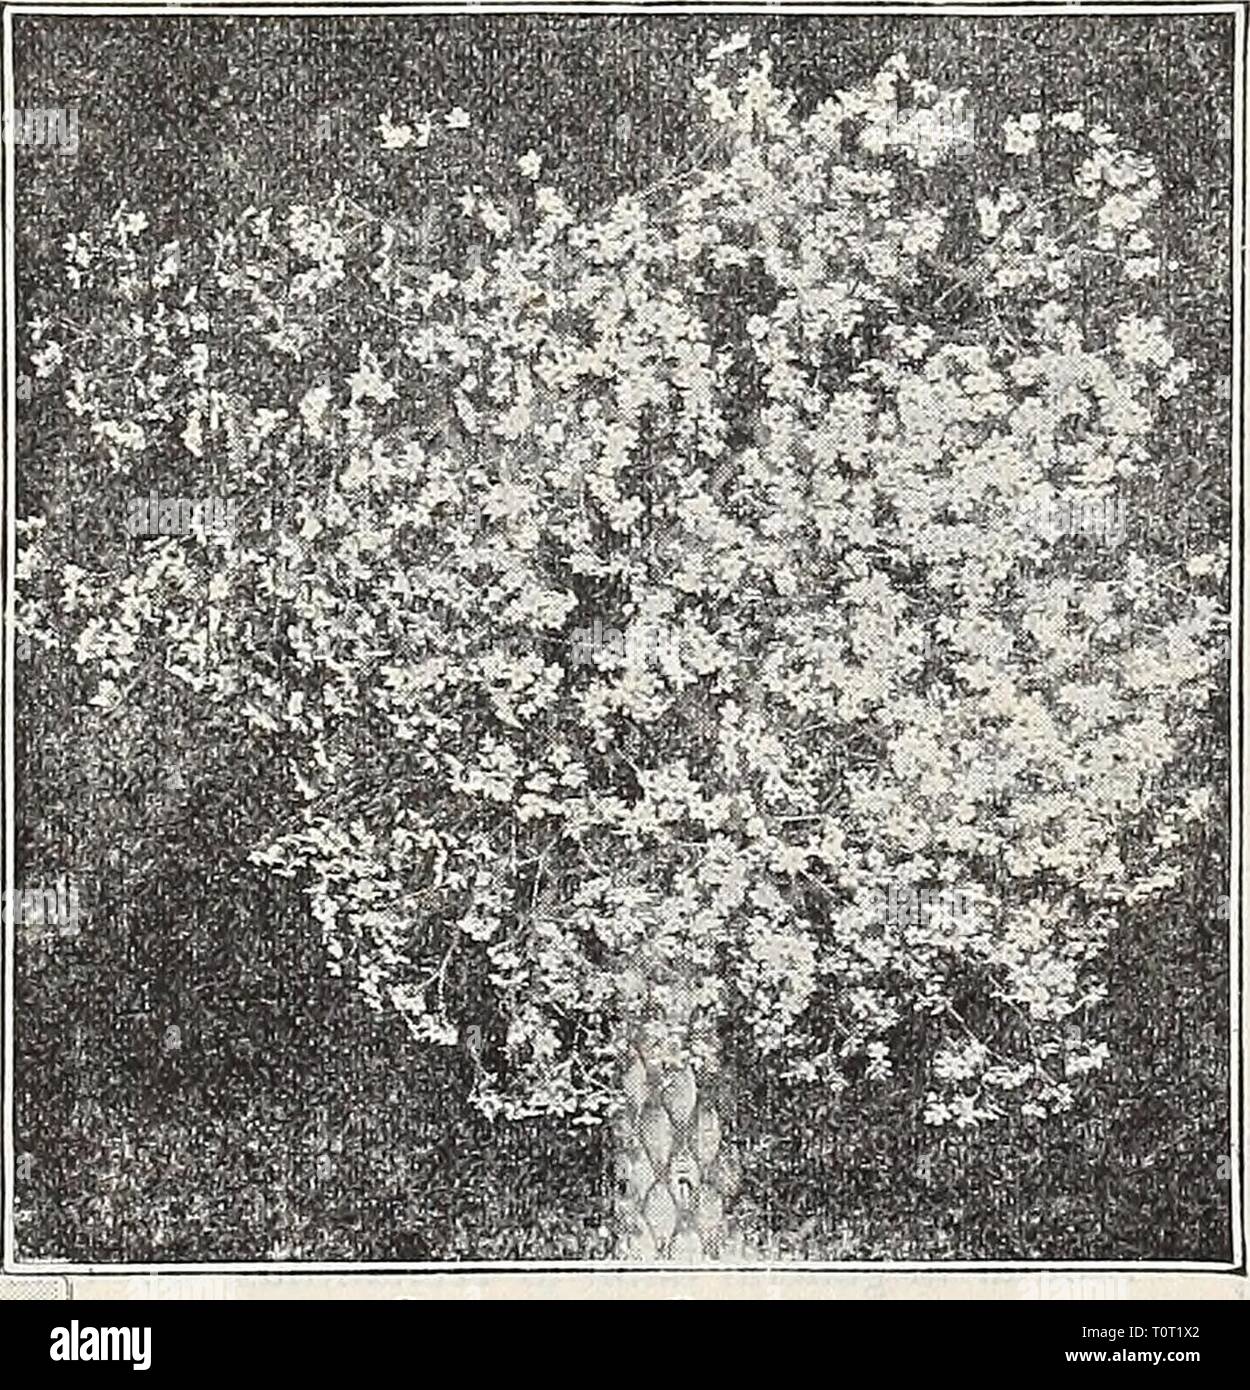 Dreer's 1909 garden book (1909) Dreer's 1909 garden book  dreers1909garden1909henr Year: 1909  Gypsophila Paniculata. minute pure white flowers, forming &gt;N theMakgin of one of ouk Lily Ponds. GYPSOPHILA. (Baby's Breath.) The Gypsophilas will thrive in any soil in a sunny position, and on account of their gracefully arranged large pan- icles of minute flowers should be in every garden; the new variety Paniculata Fl. PL if cut and dried, will retain its beauty for many months, furnishing most attractive decorative material in this shape. Acutifolia. A strong-growing kind, . attaining a height Stock Photo